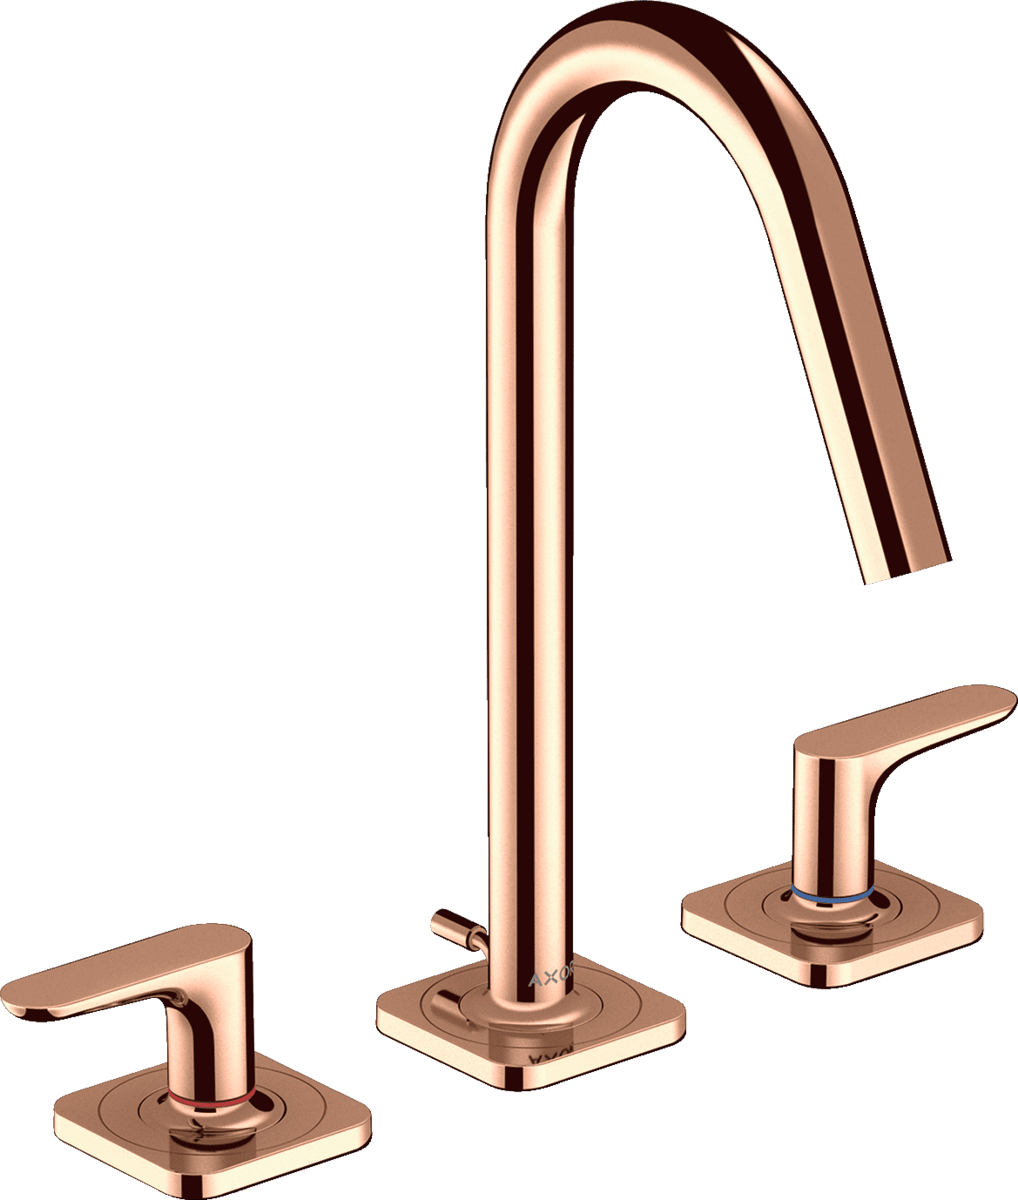 Picture of HANSGROHE AXOR Citterio M 3-hole basin mixer 160 with lever handles, escutcheons and pop-up waste set #34133300 - Polished Red Gold